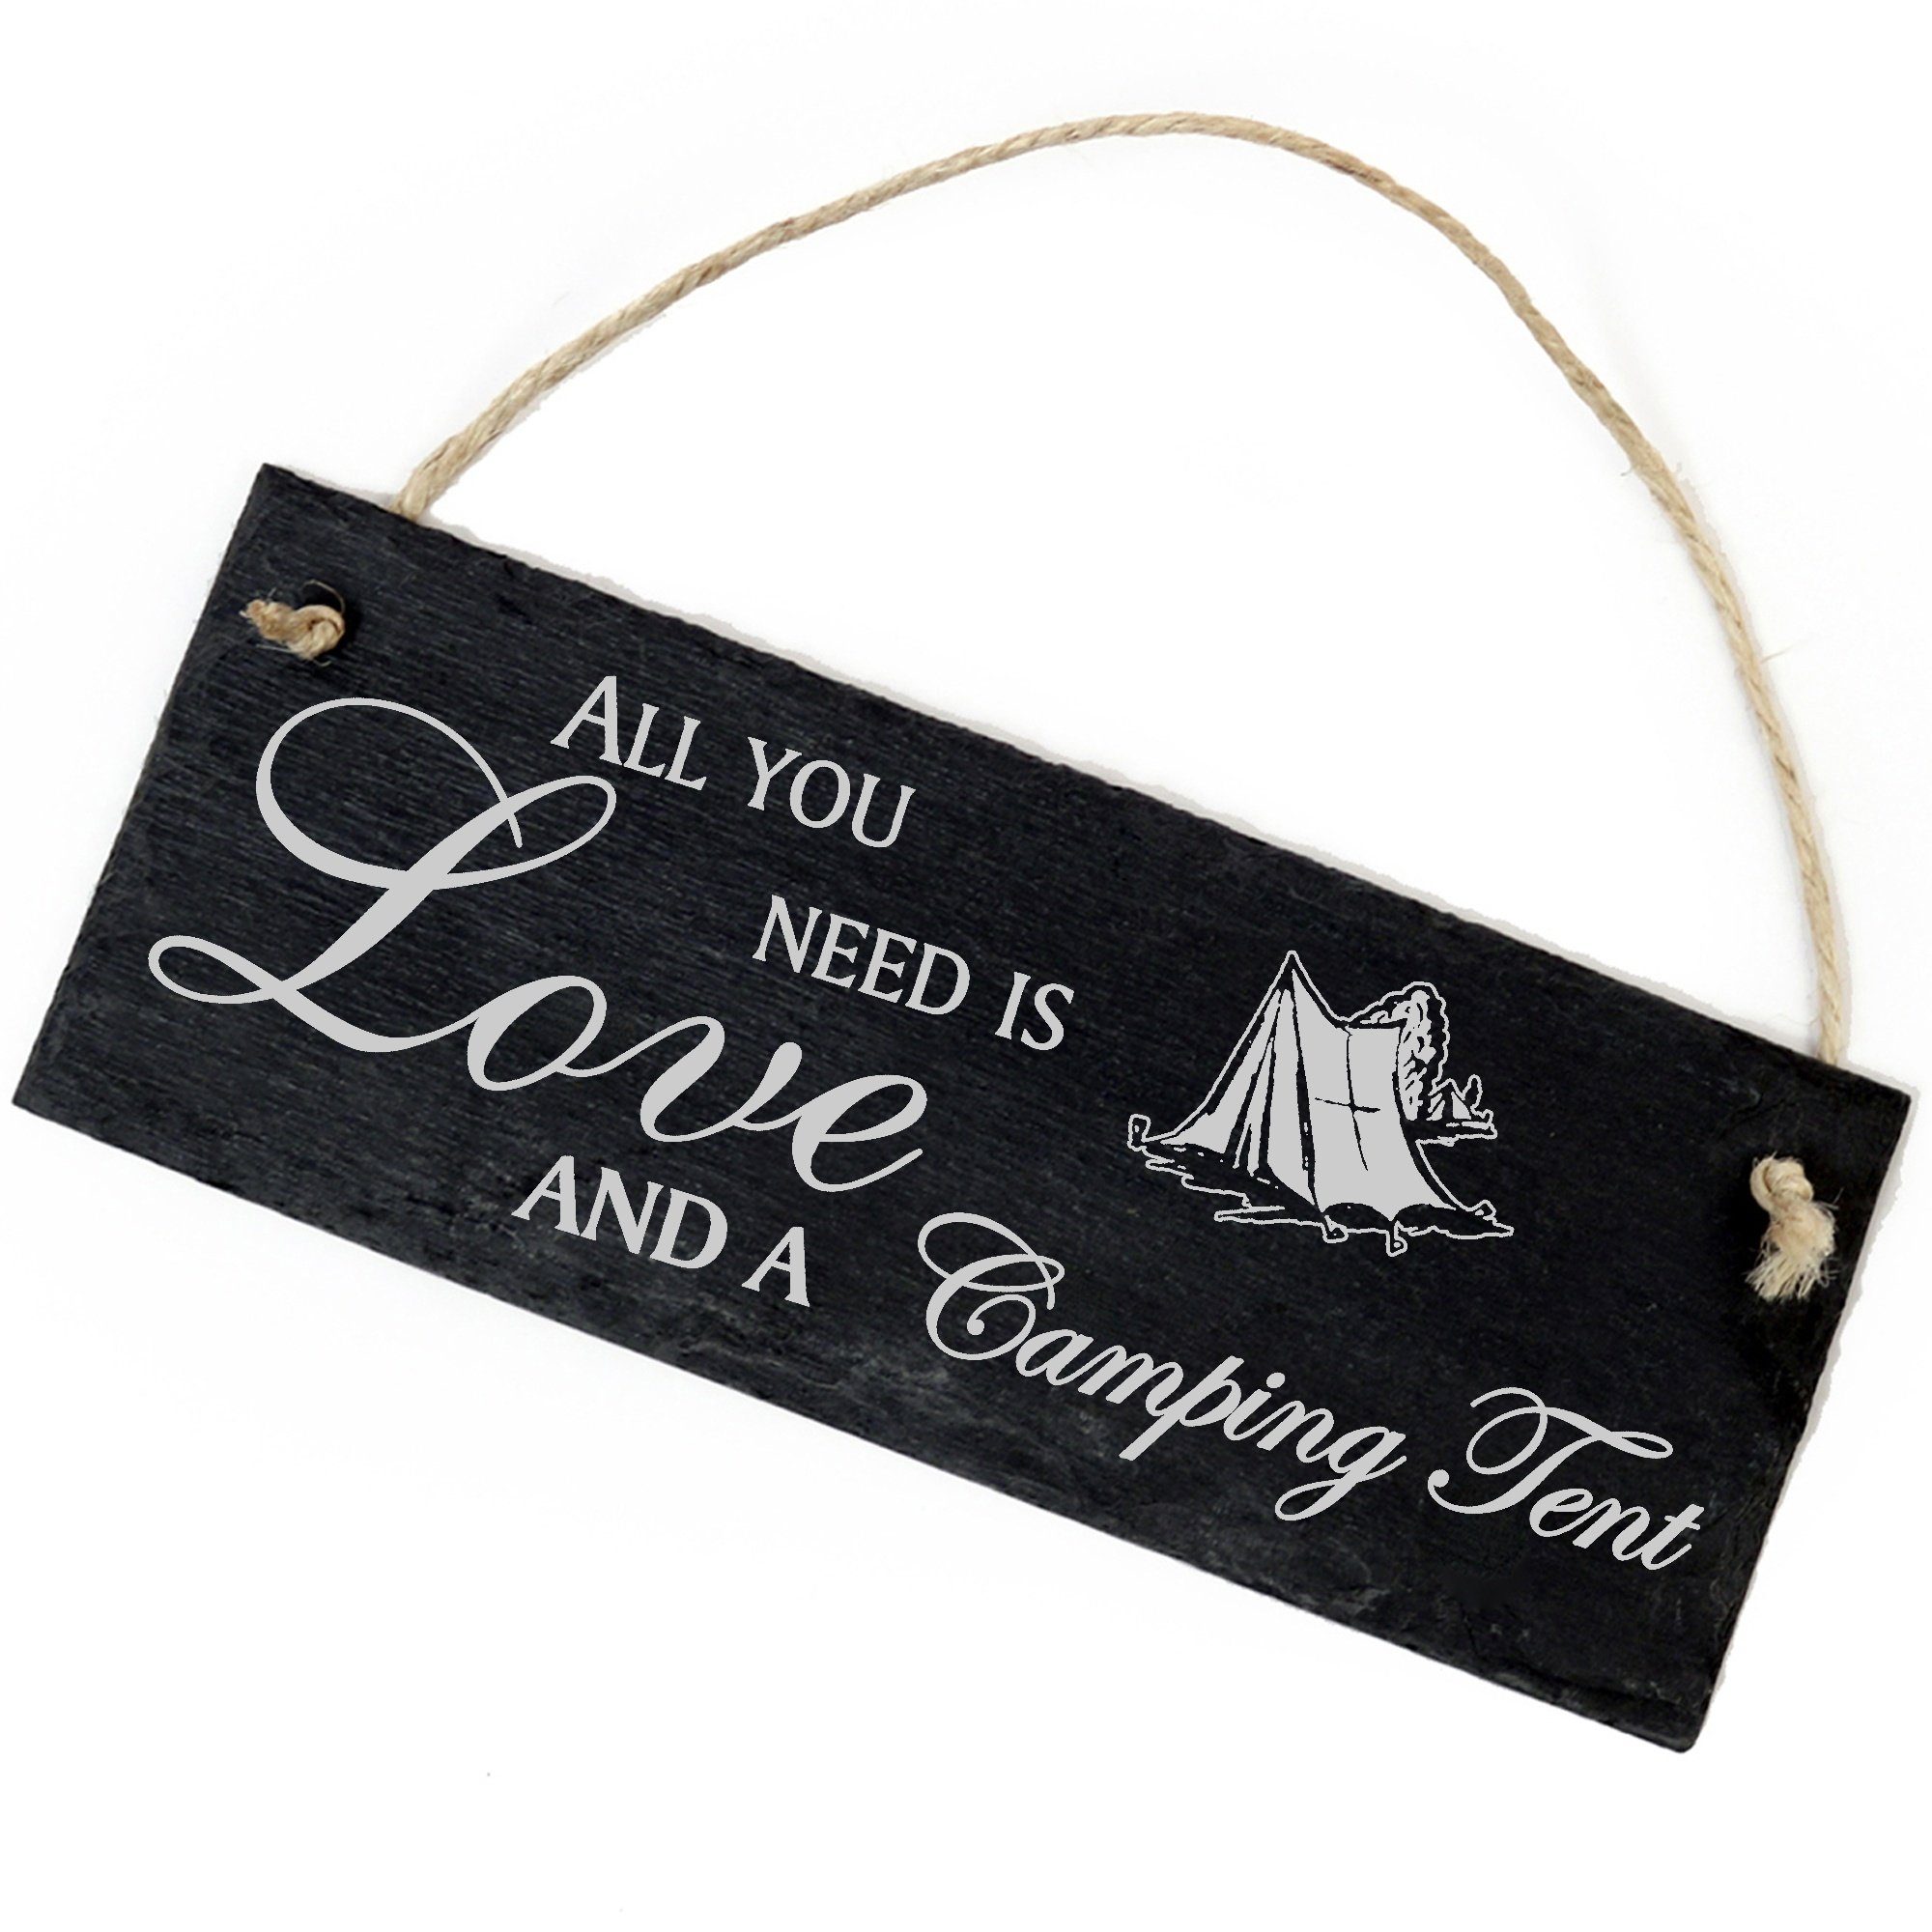 Dekolando Hängedekoration Campingzelt 22x8cm All you need is Love and a Camping Tent